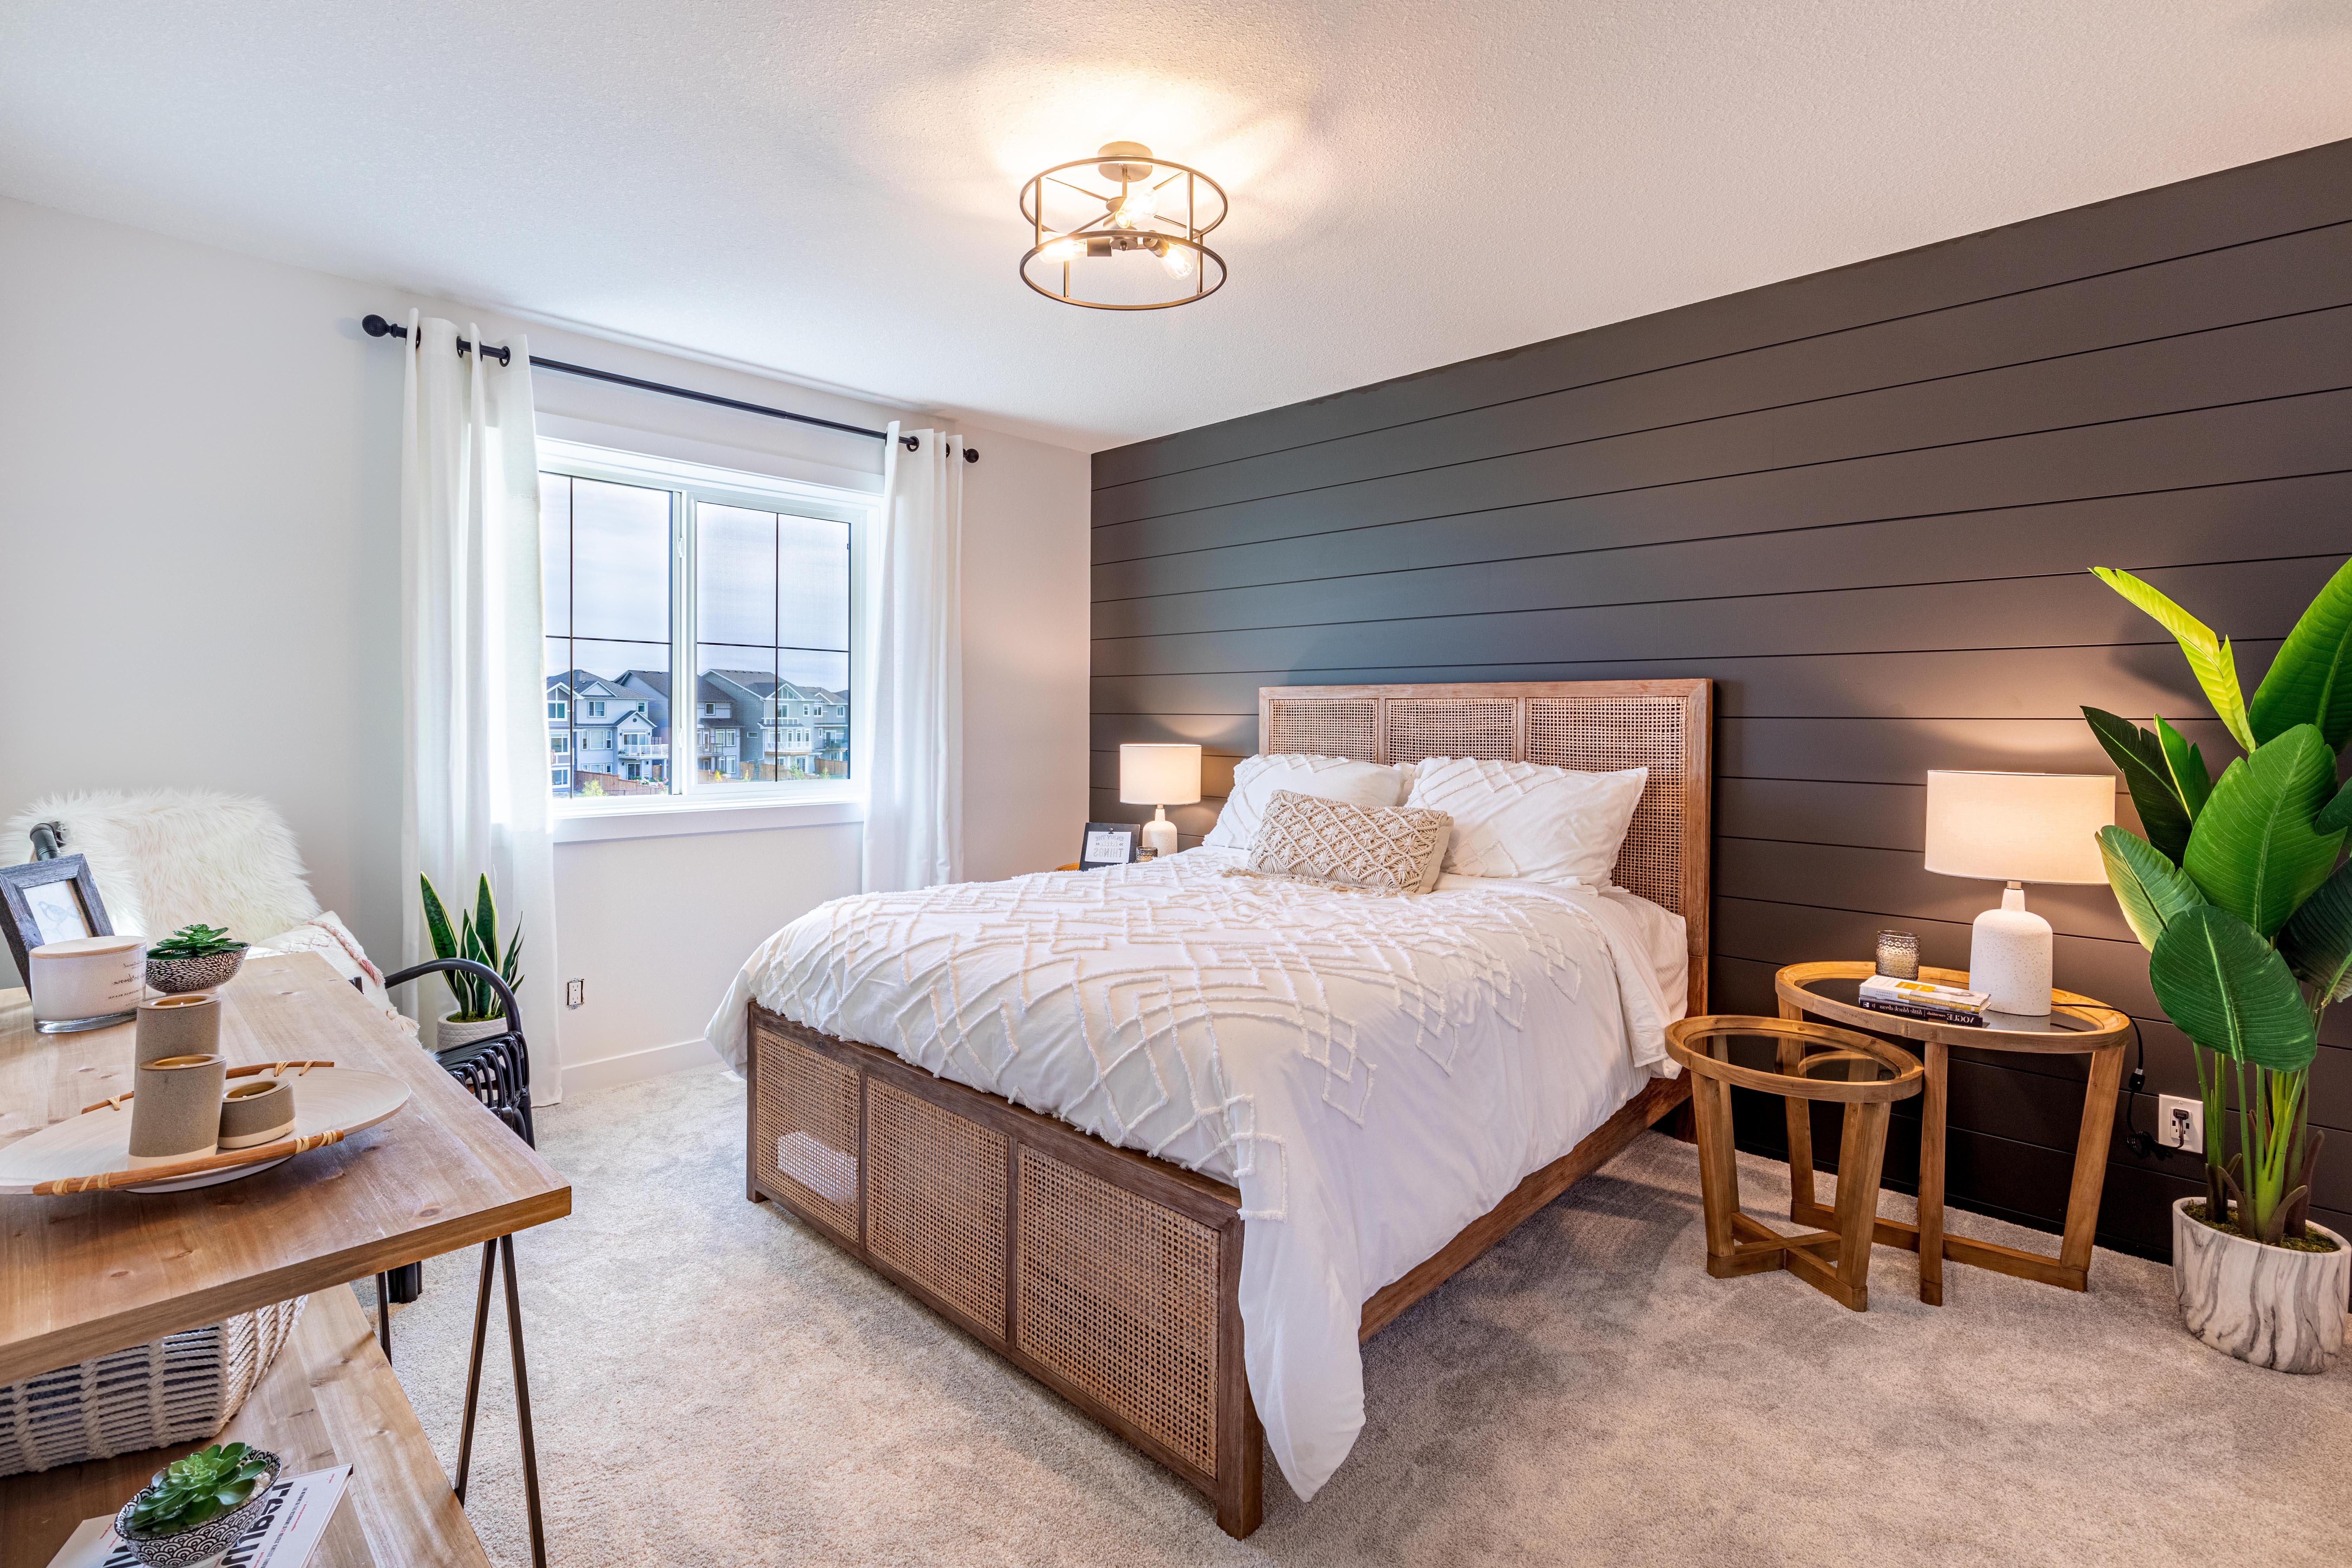 White bedroom with shiplap focal wall, wooden fixtures and bohemian accents